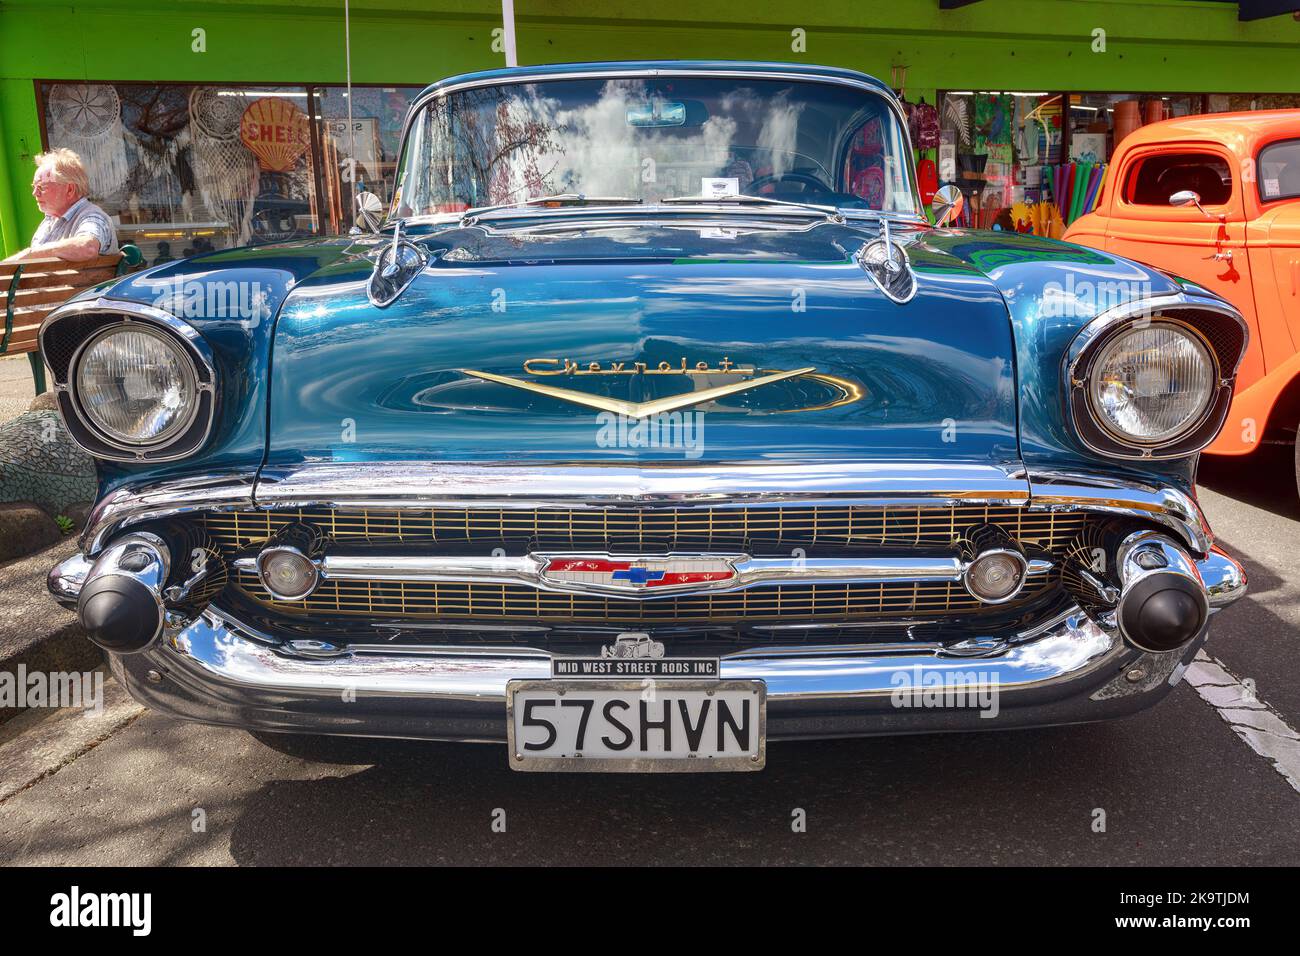 The front of a 1957 Chevrolet Belair, photographed at a classic car show Stock Photo